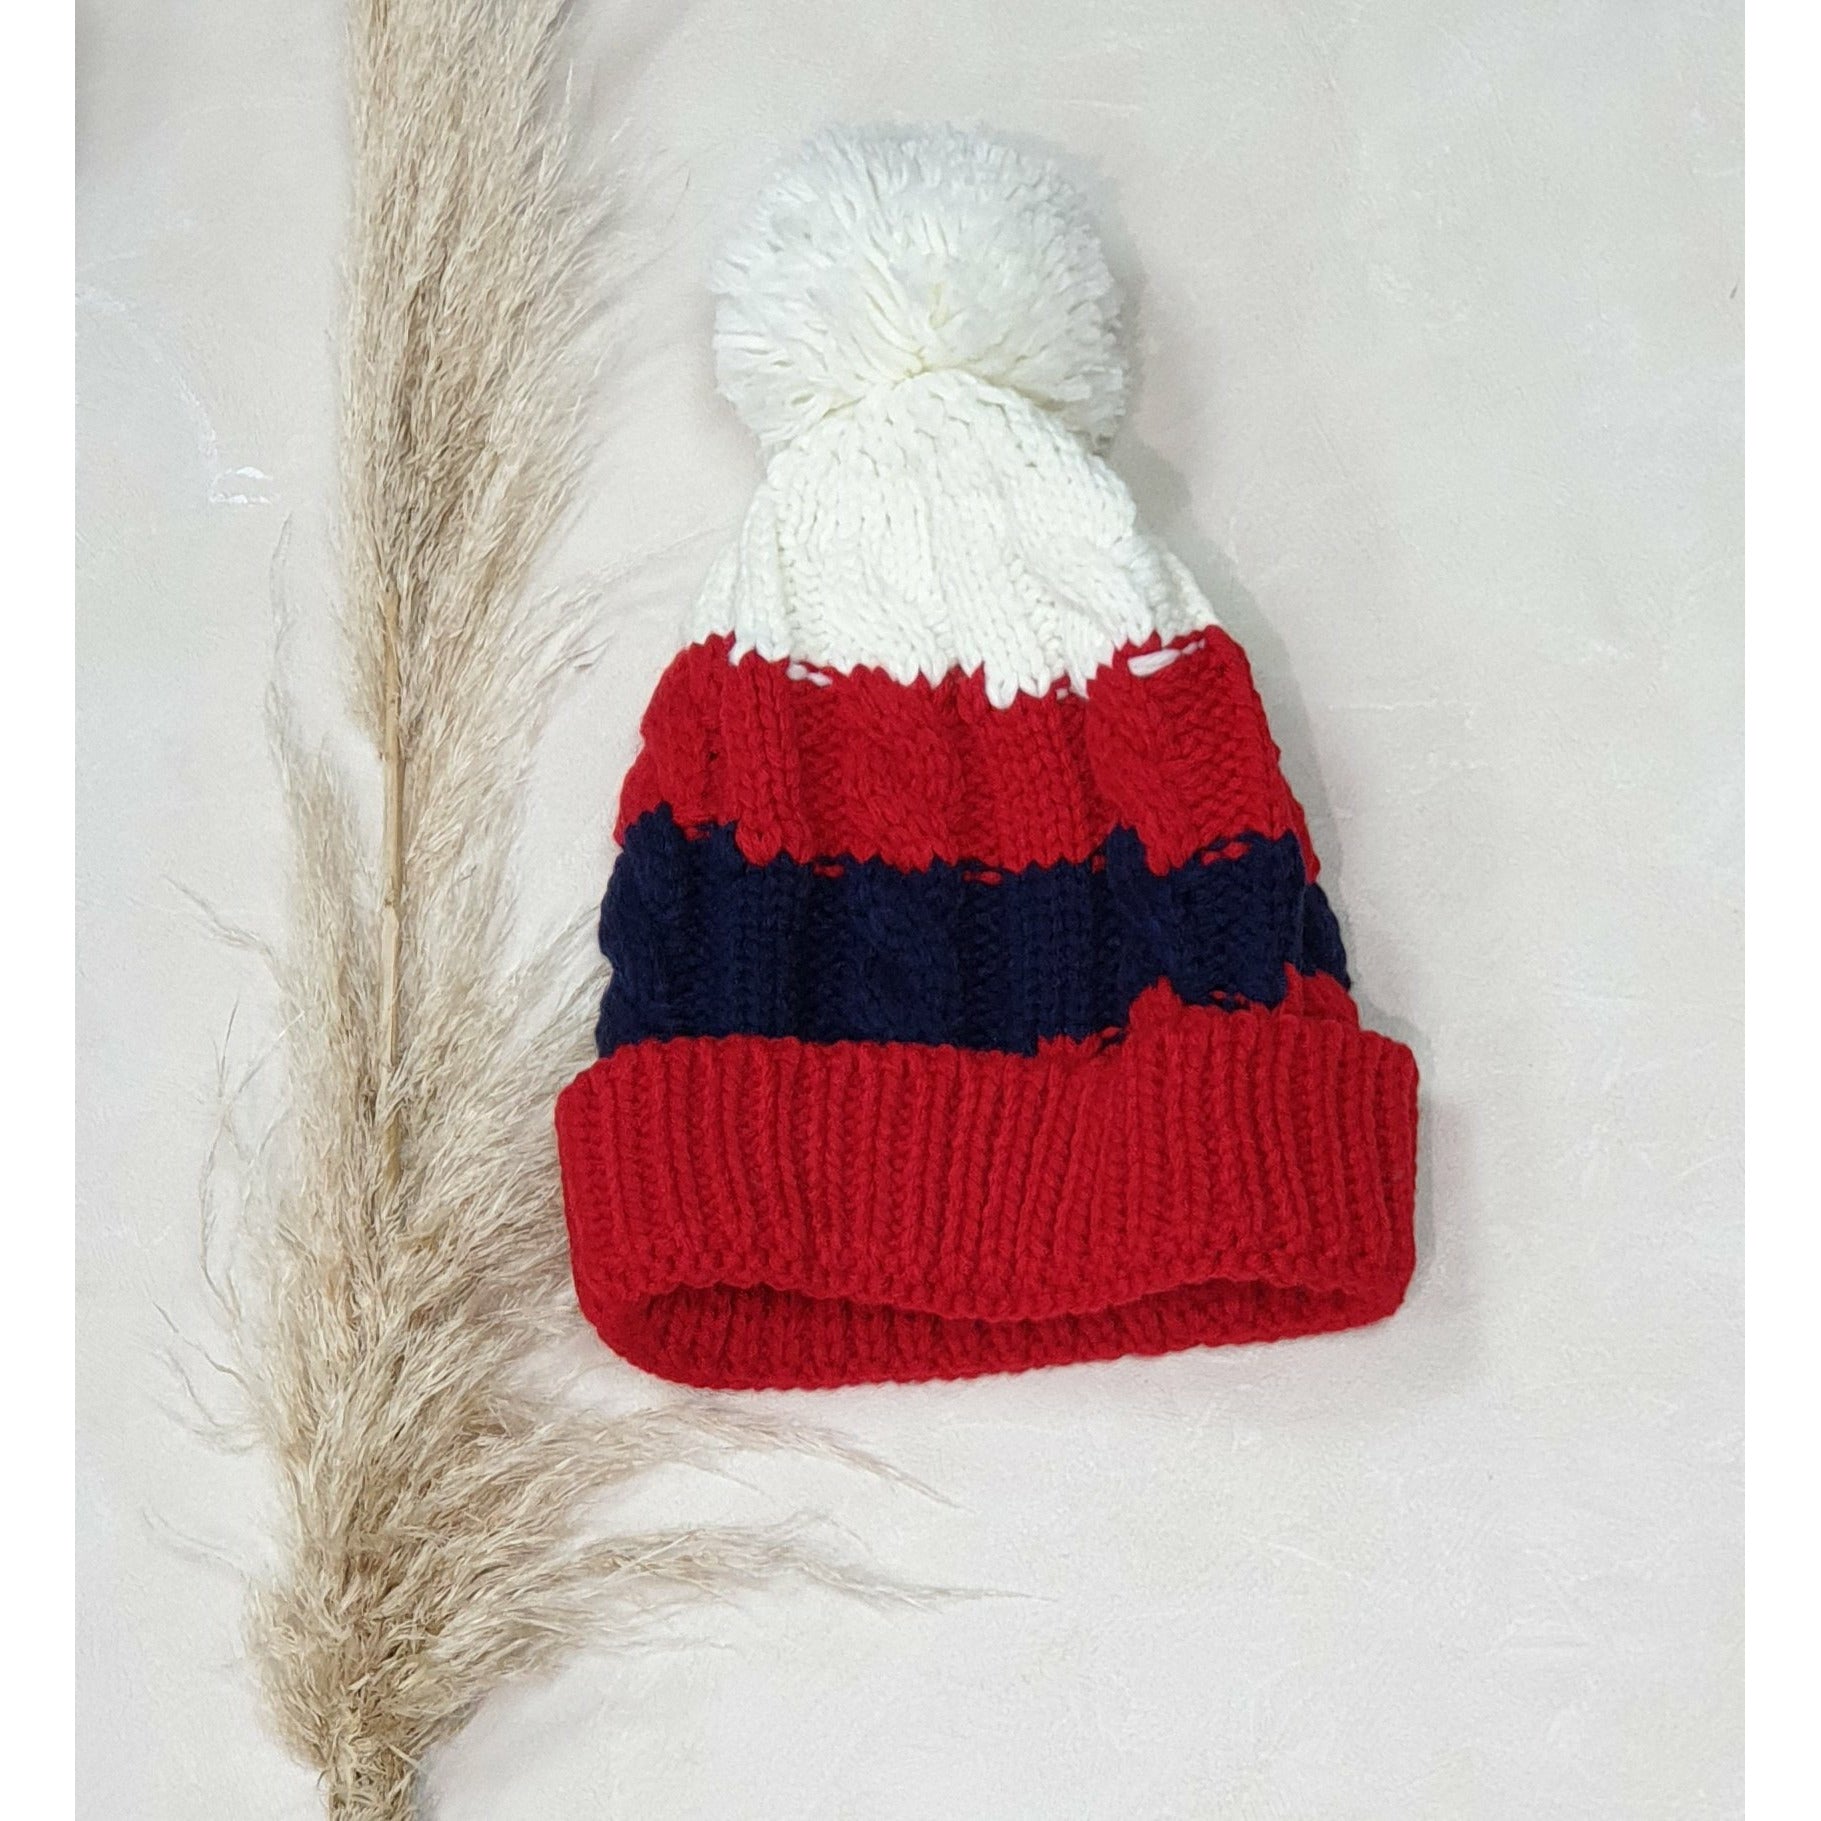 Beanie - Harley | Red/White/Navy Not specified